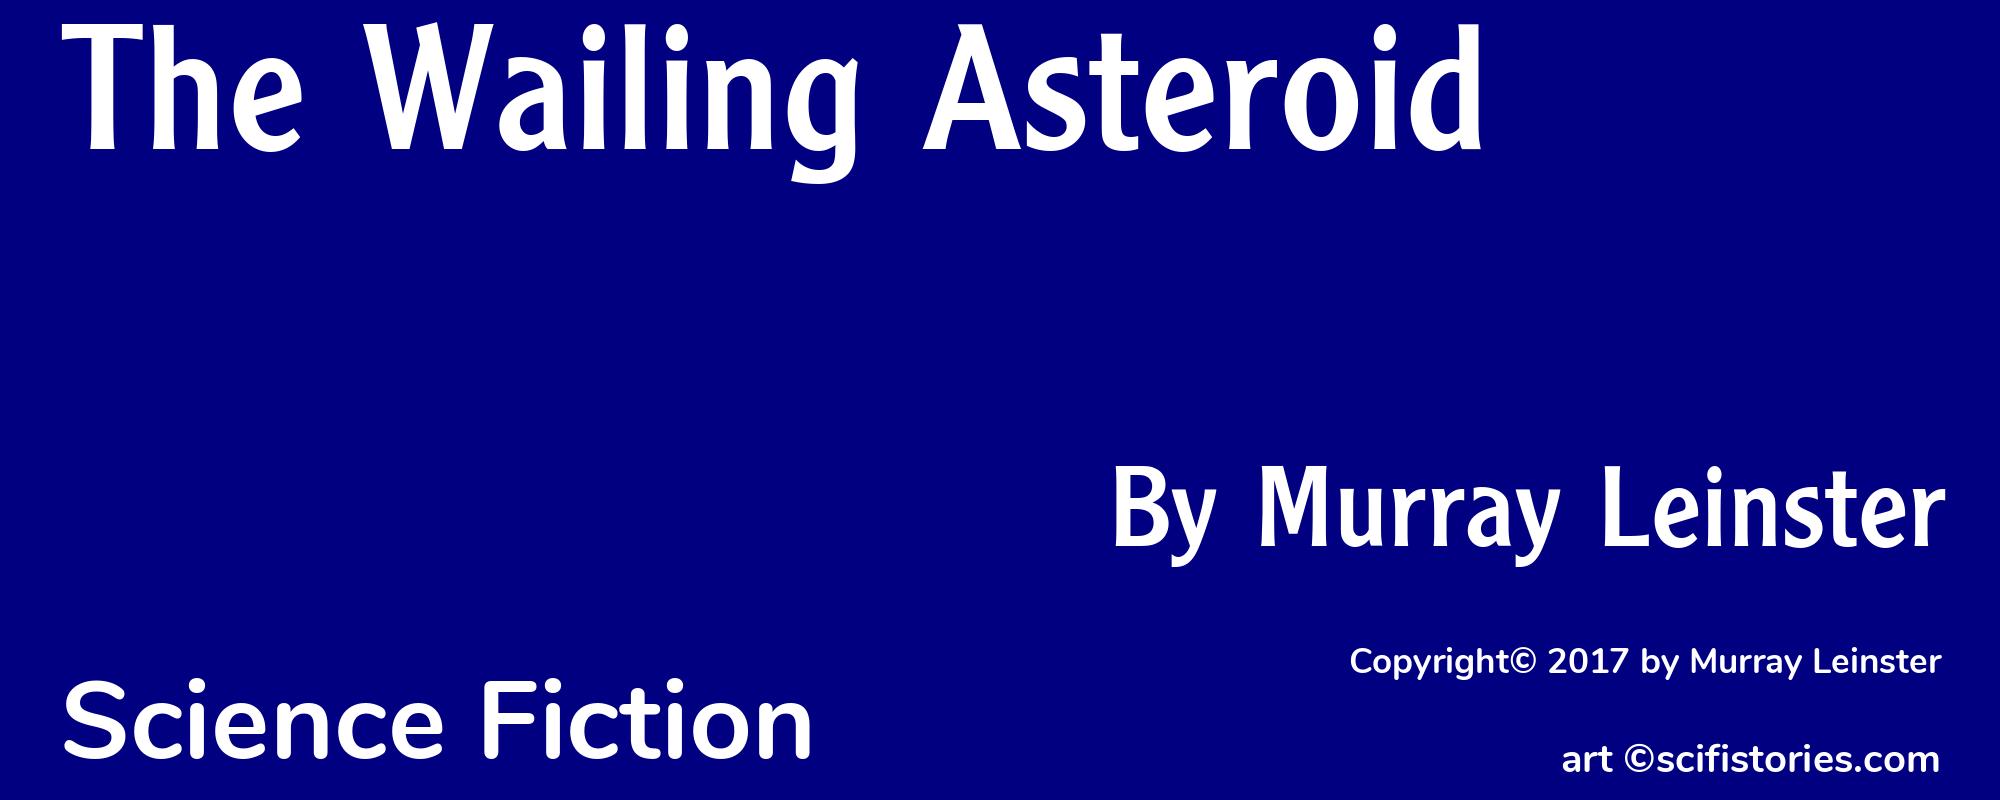 The Wailing Asteroid - Cover